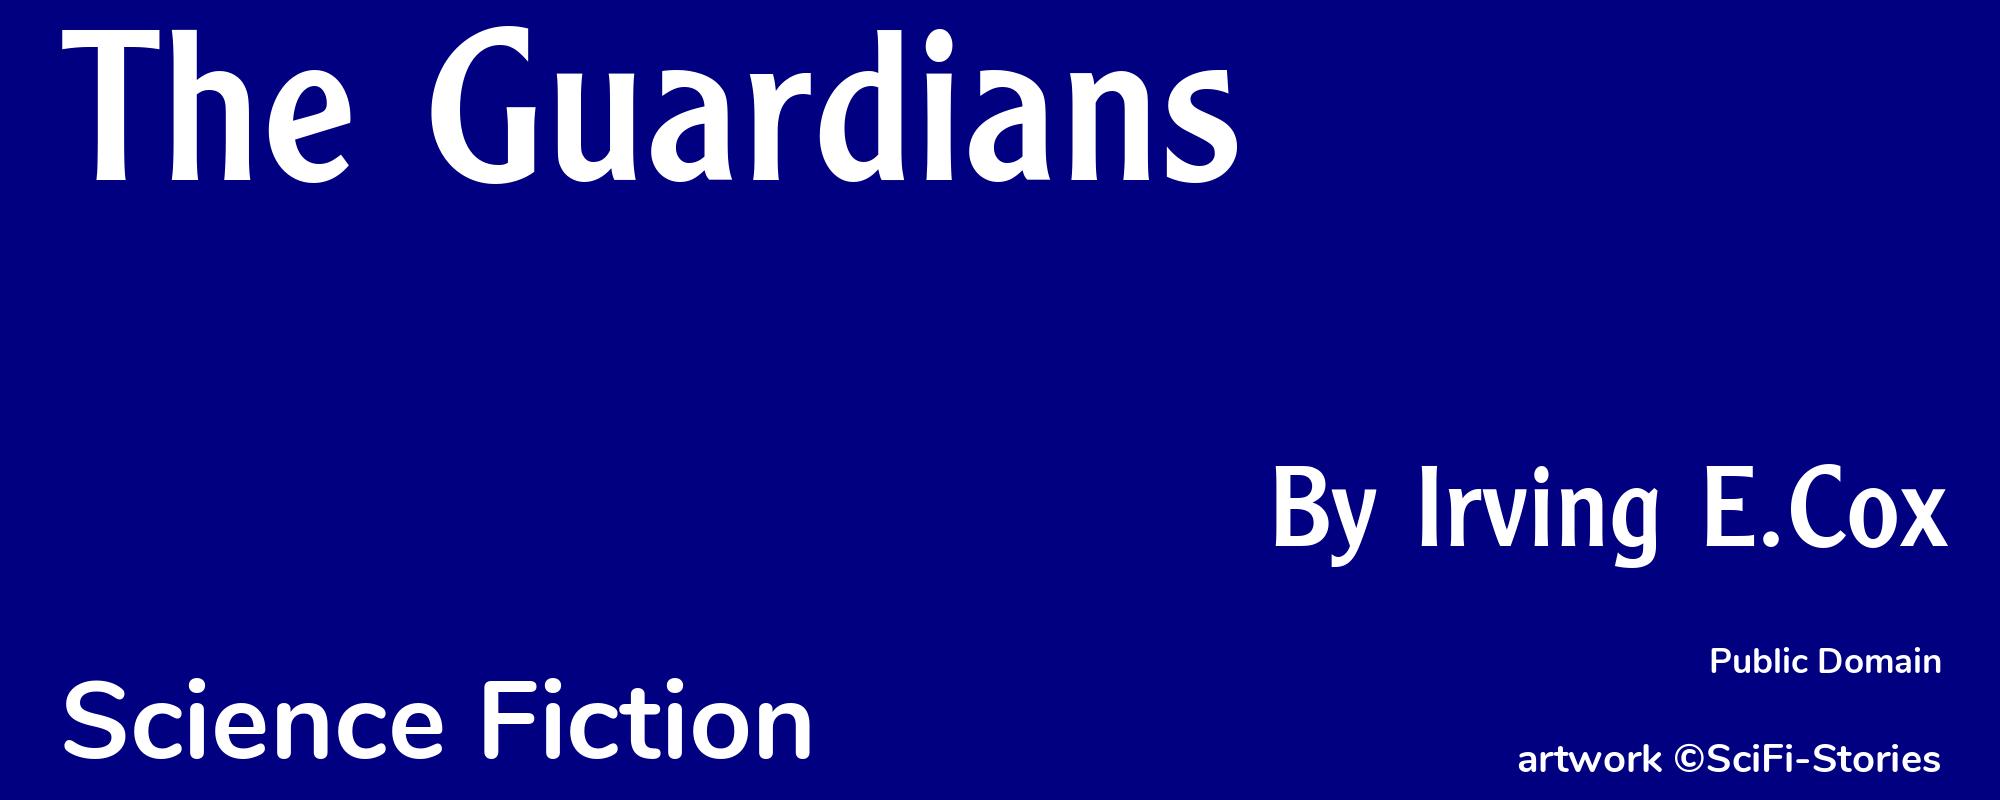 The Guardians - Cover